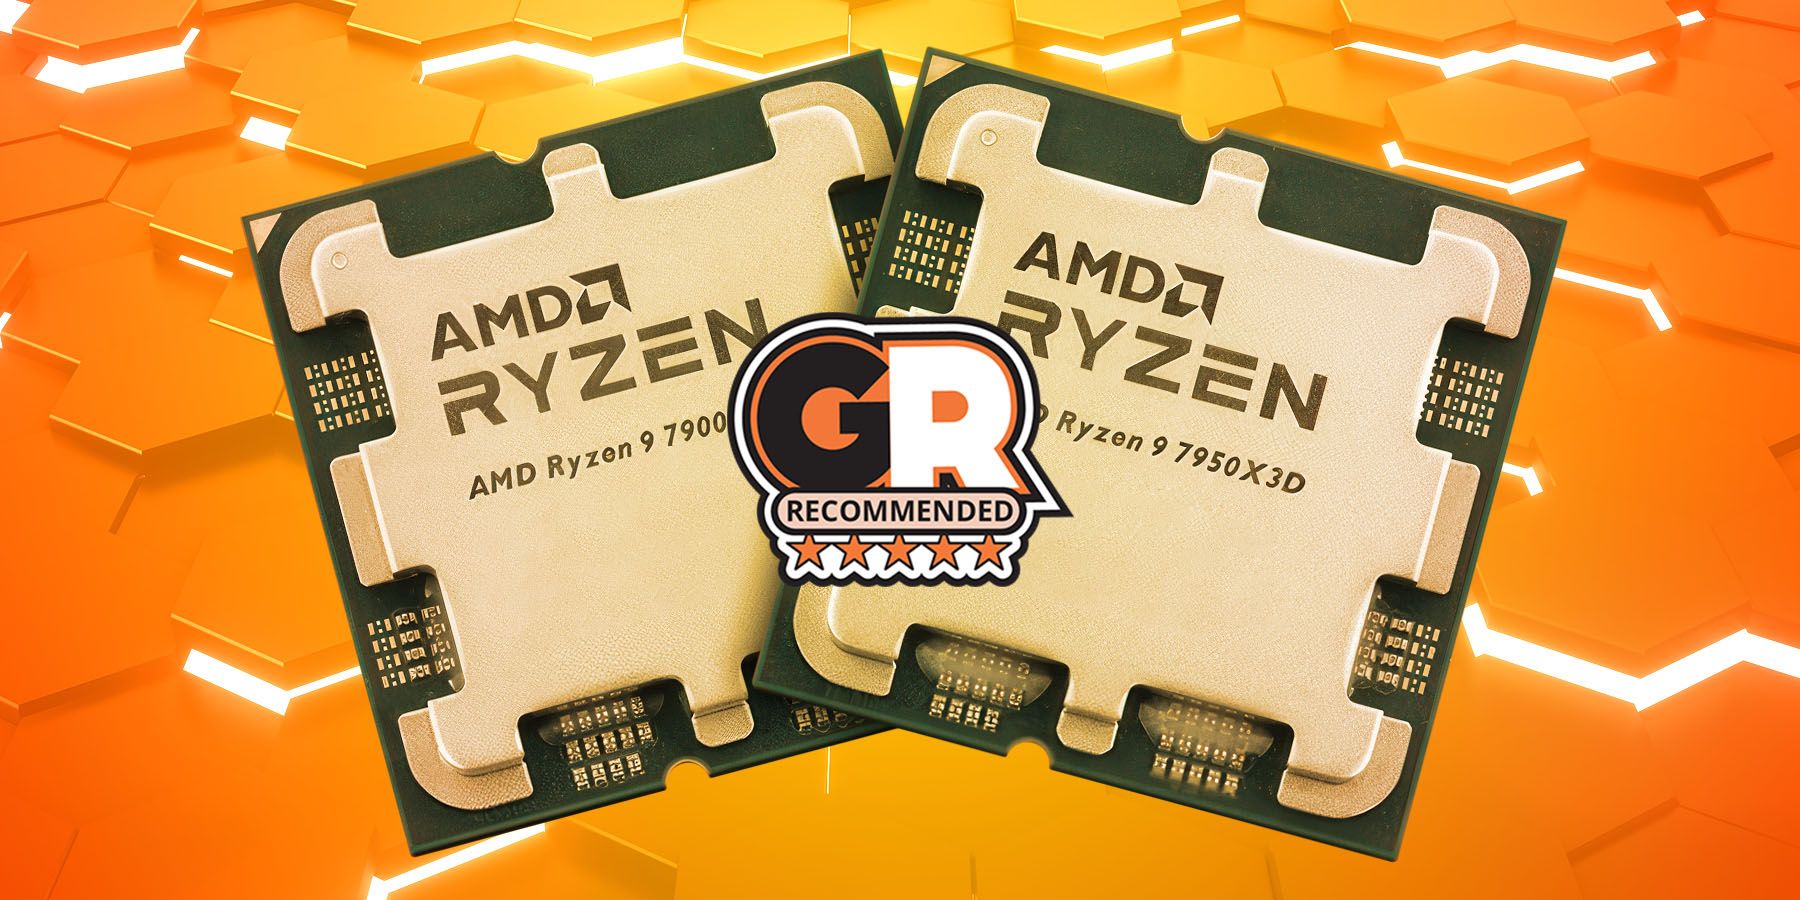 AMD Ryzen 9 7950X3D Gaming and Workstation Review - Intel's Core  i9-13900K(S) lost the “Gaming Crown”